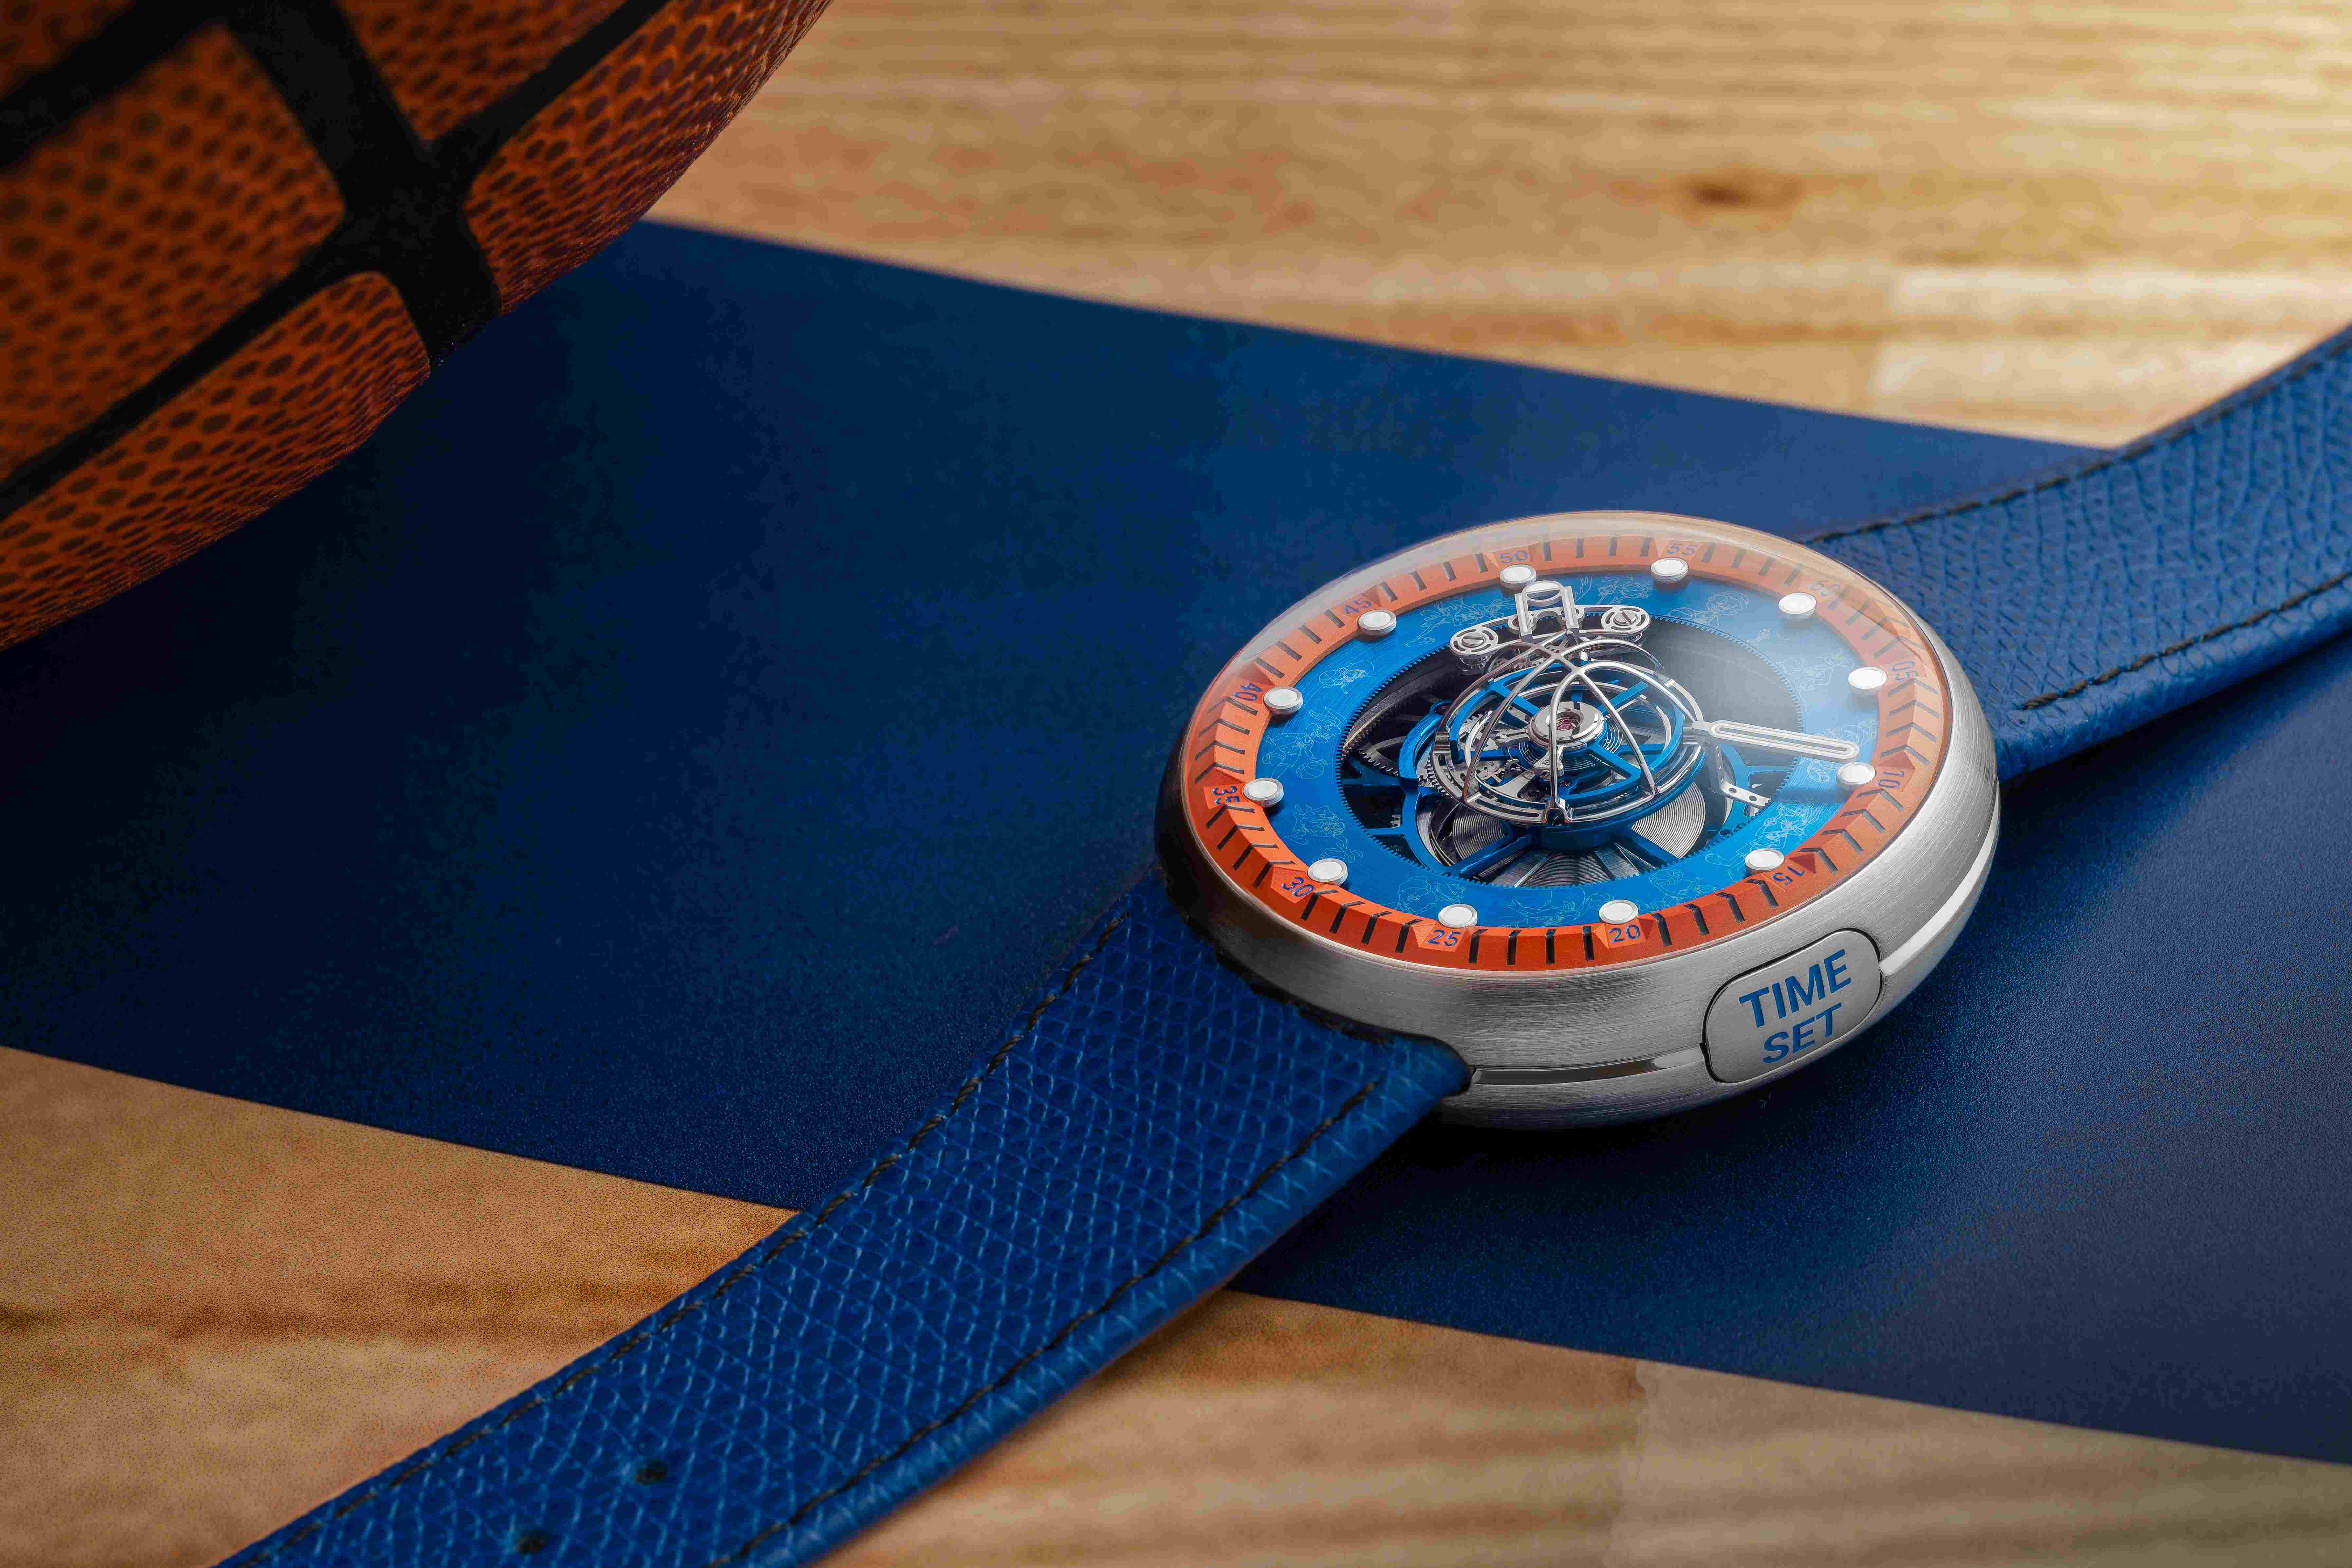 Kross Studio and Warner Bros. Consumer Products Announce Release of “Space Jam: A New Legacy” Tourbillion Watch